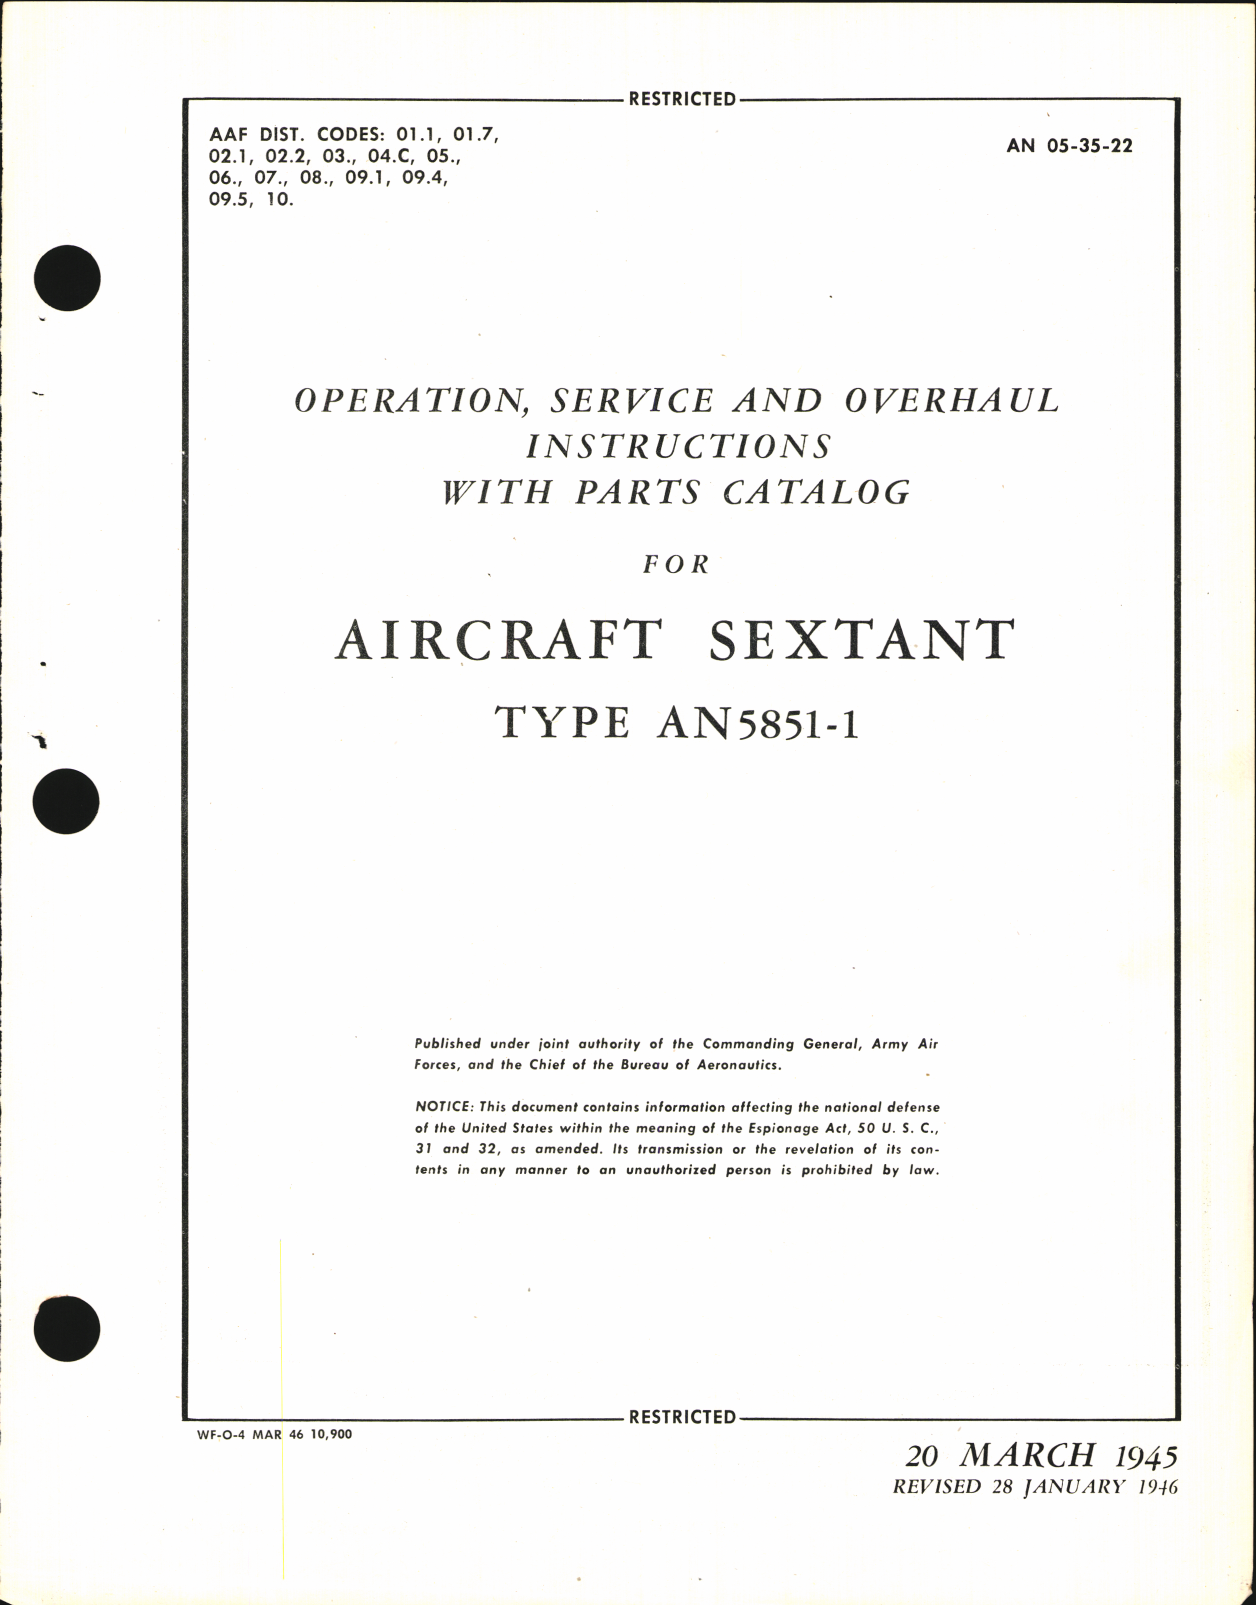 Sample page 3 from AirCorps Library document: Operation, Service, & Overhaul Instructions with Parts Catalog for Aircraft Sextant Type AN 5851-1